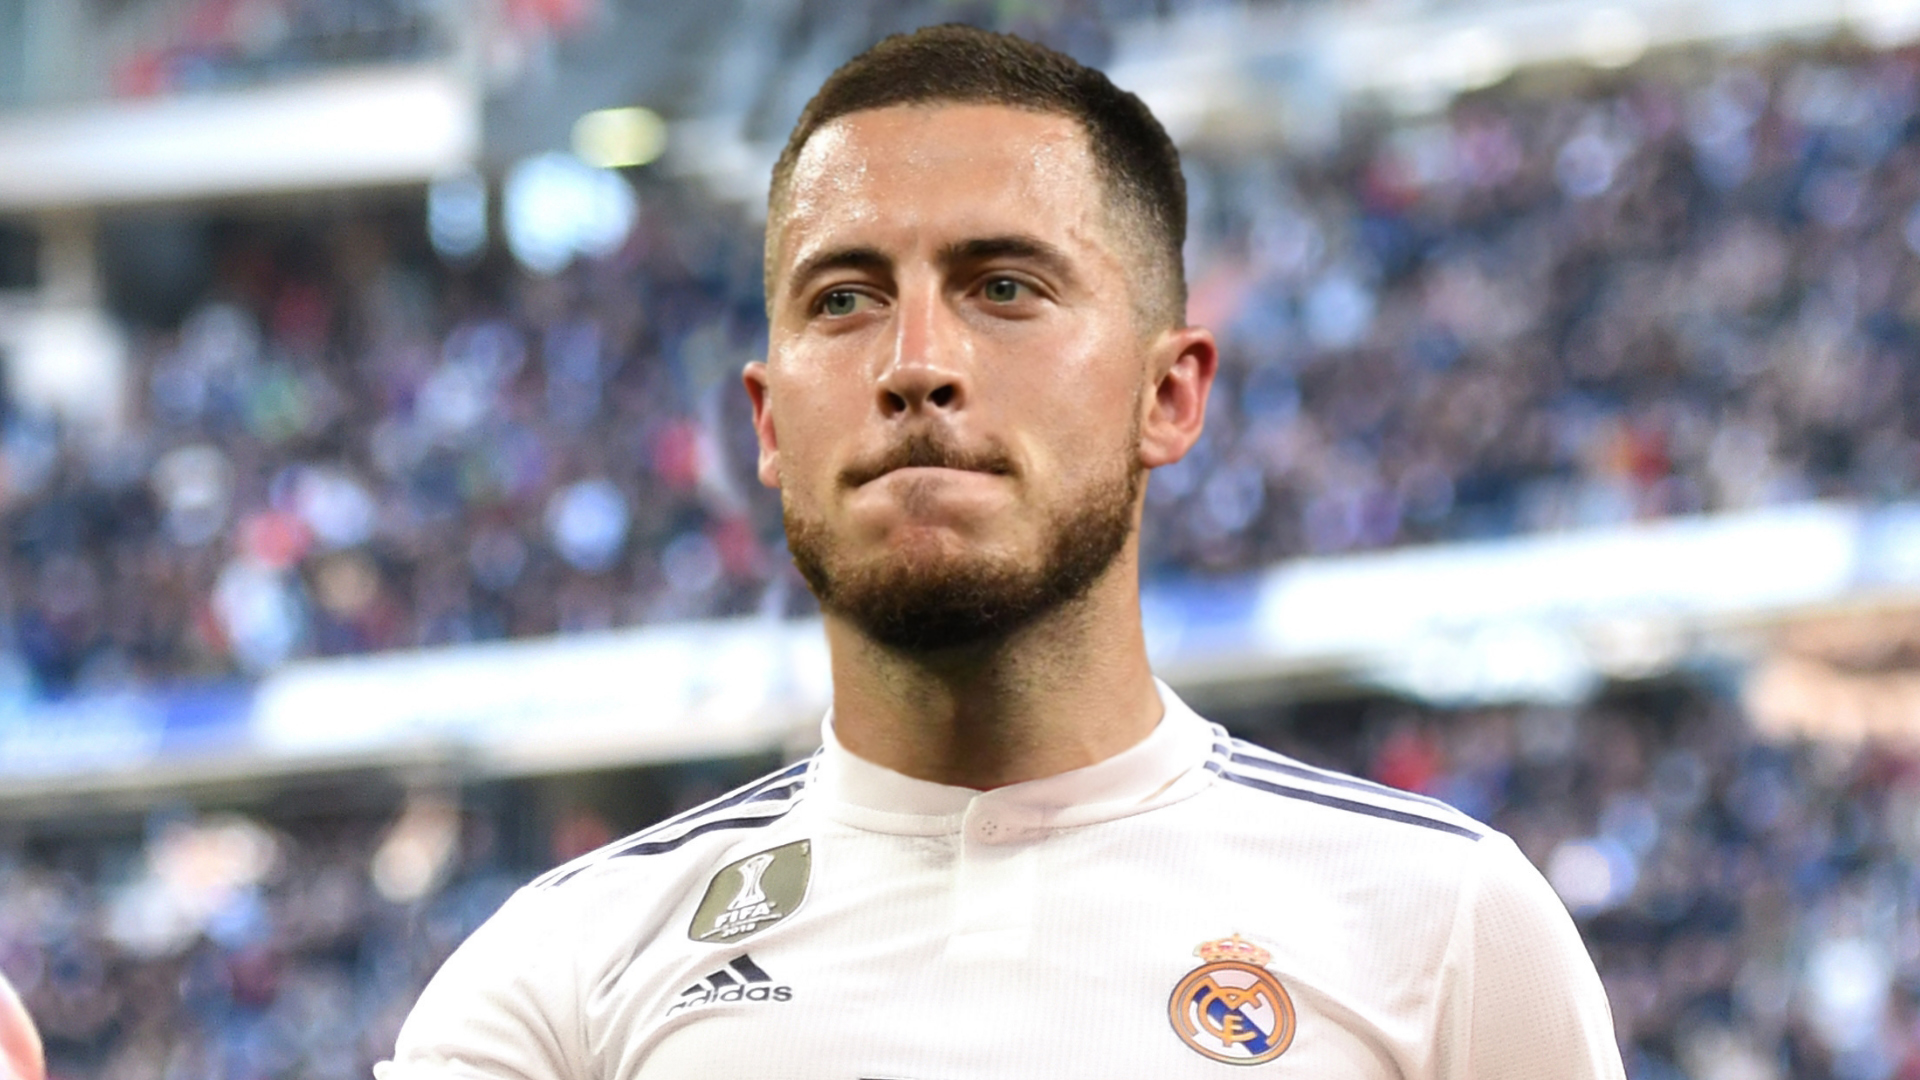 Eden Hazard transfer: Belgian star completes €100m move to Real